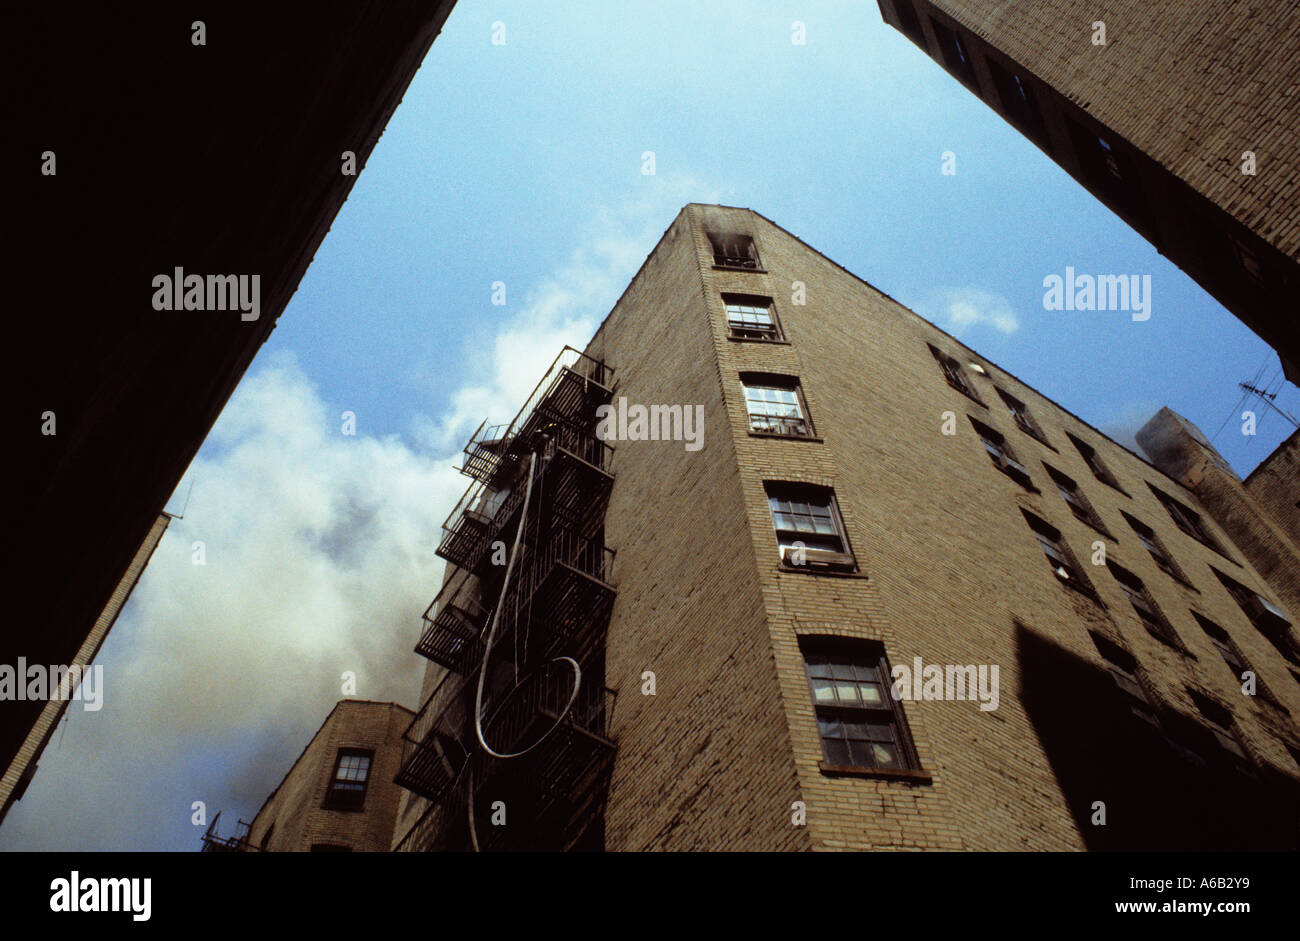 Hose being lifted by the New York fire department. Smoke coming out of a burning tenement building in The Bronx, New York City. Building on fire USA Stock Photo